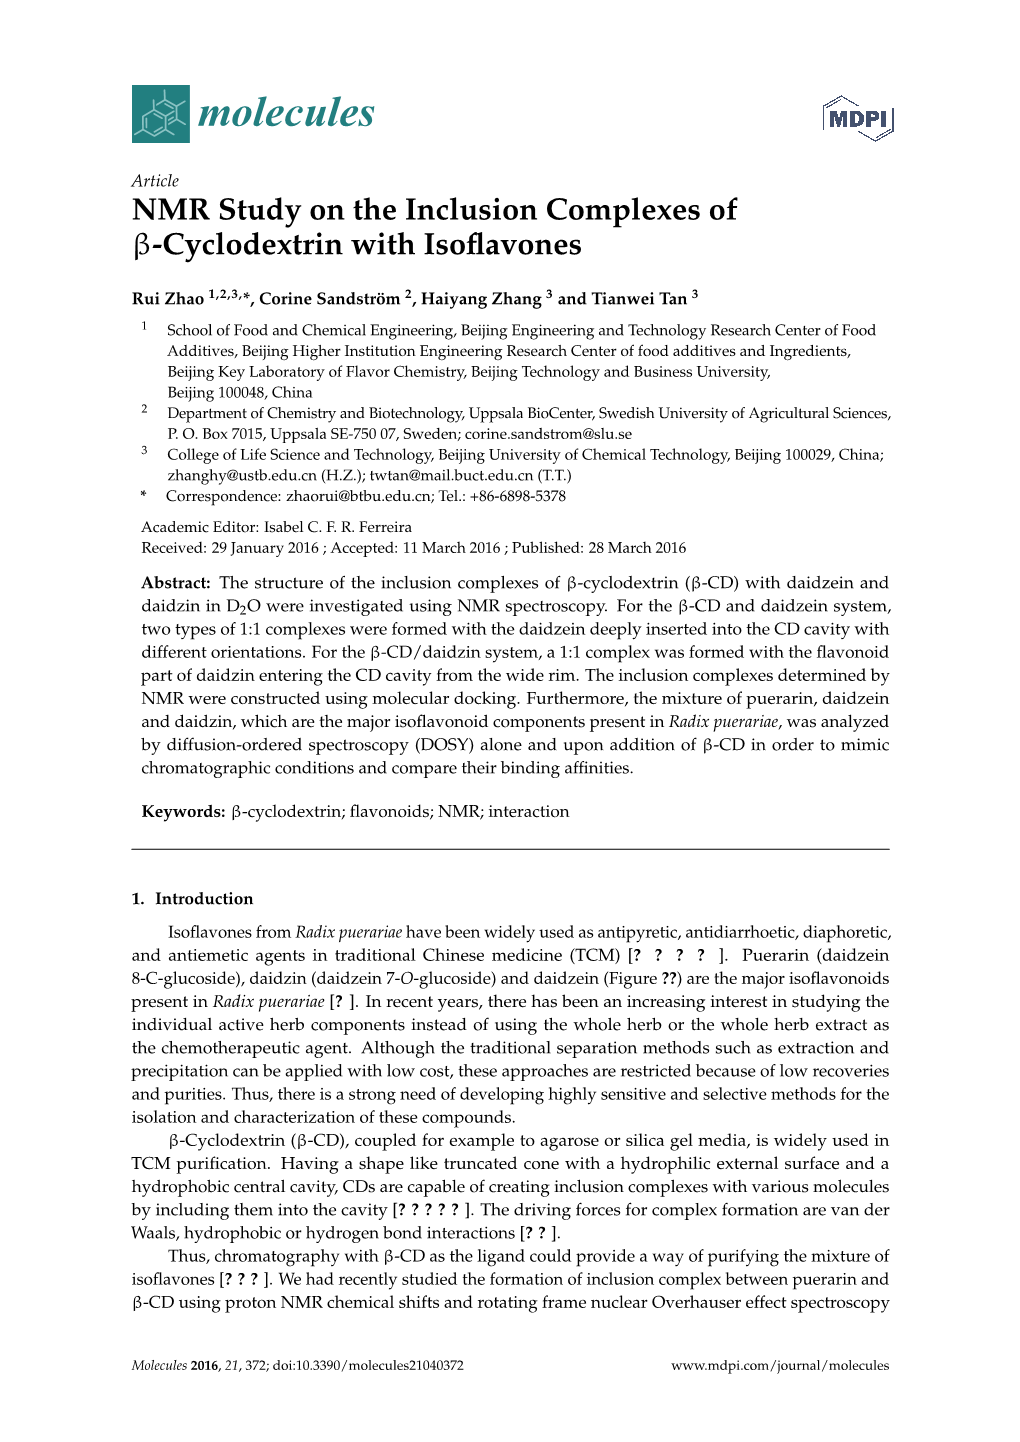 Cyclodextrin with Isoflavones